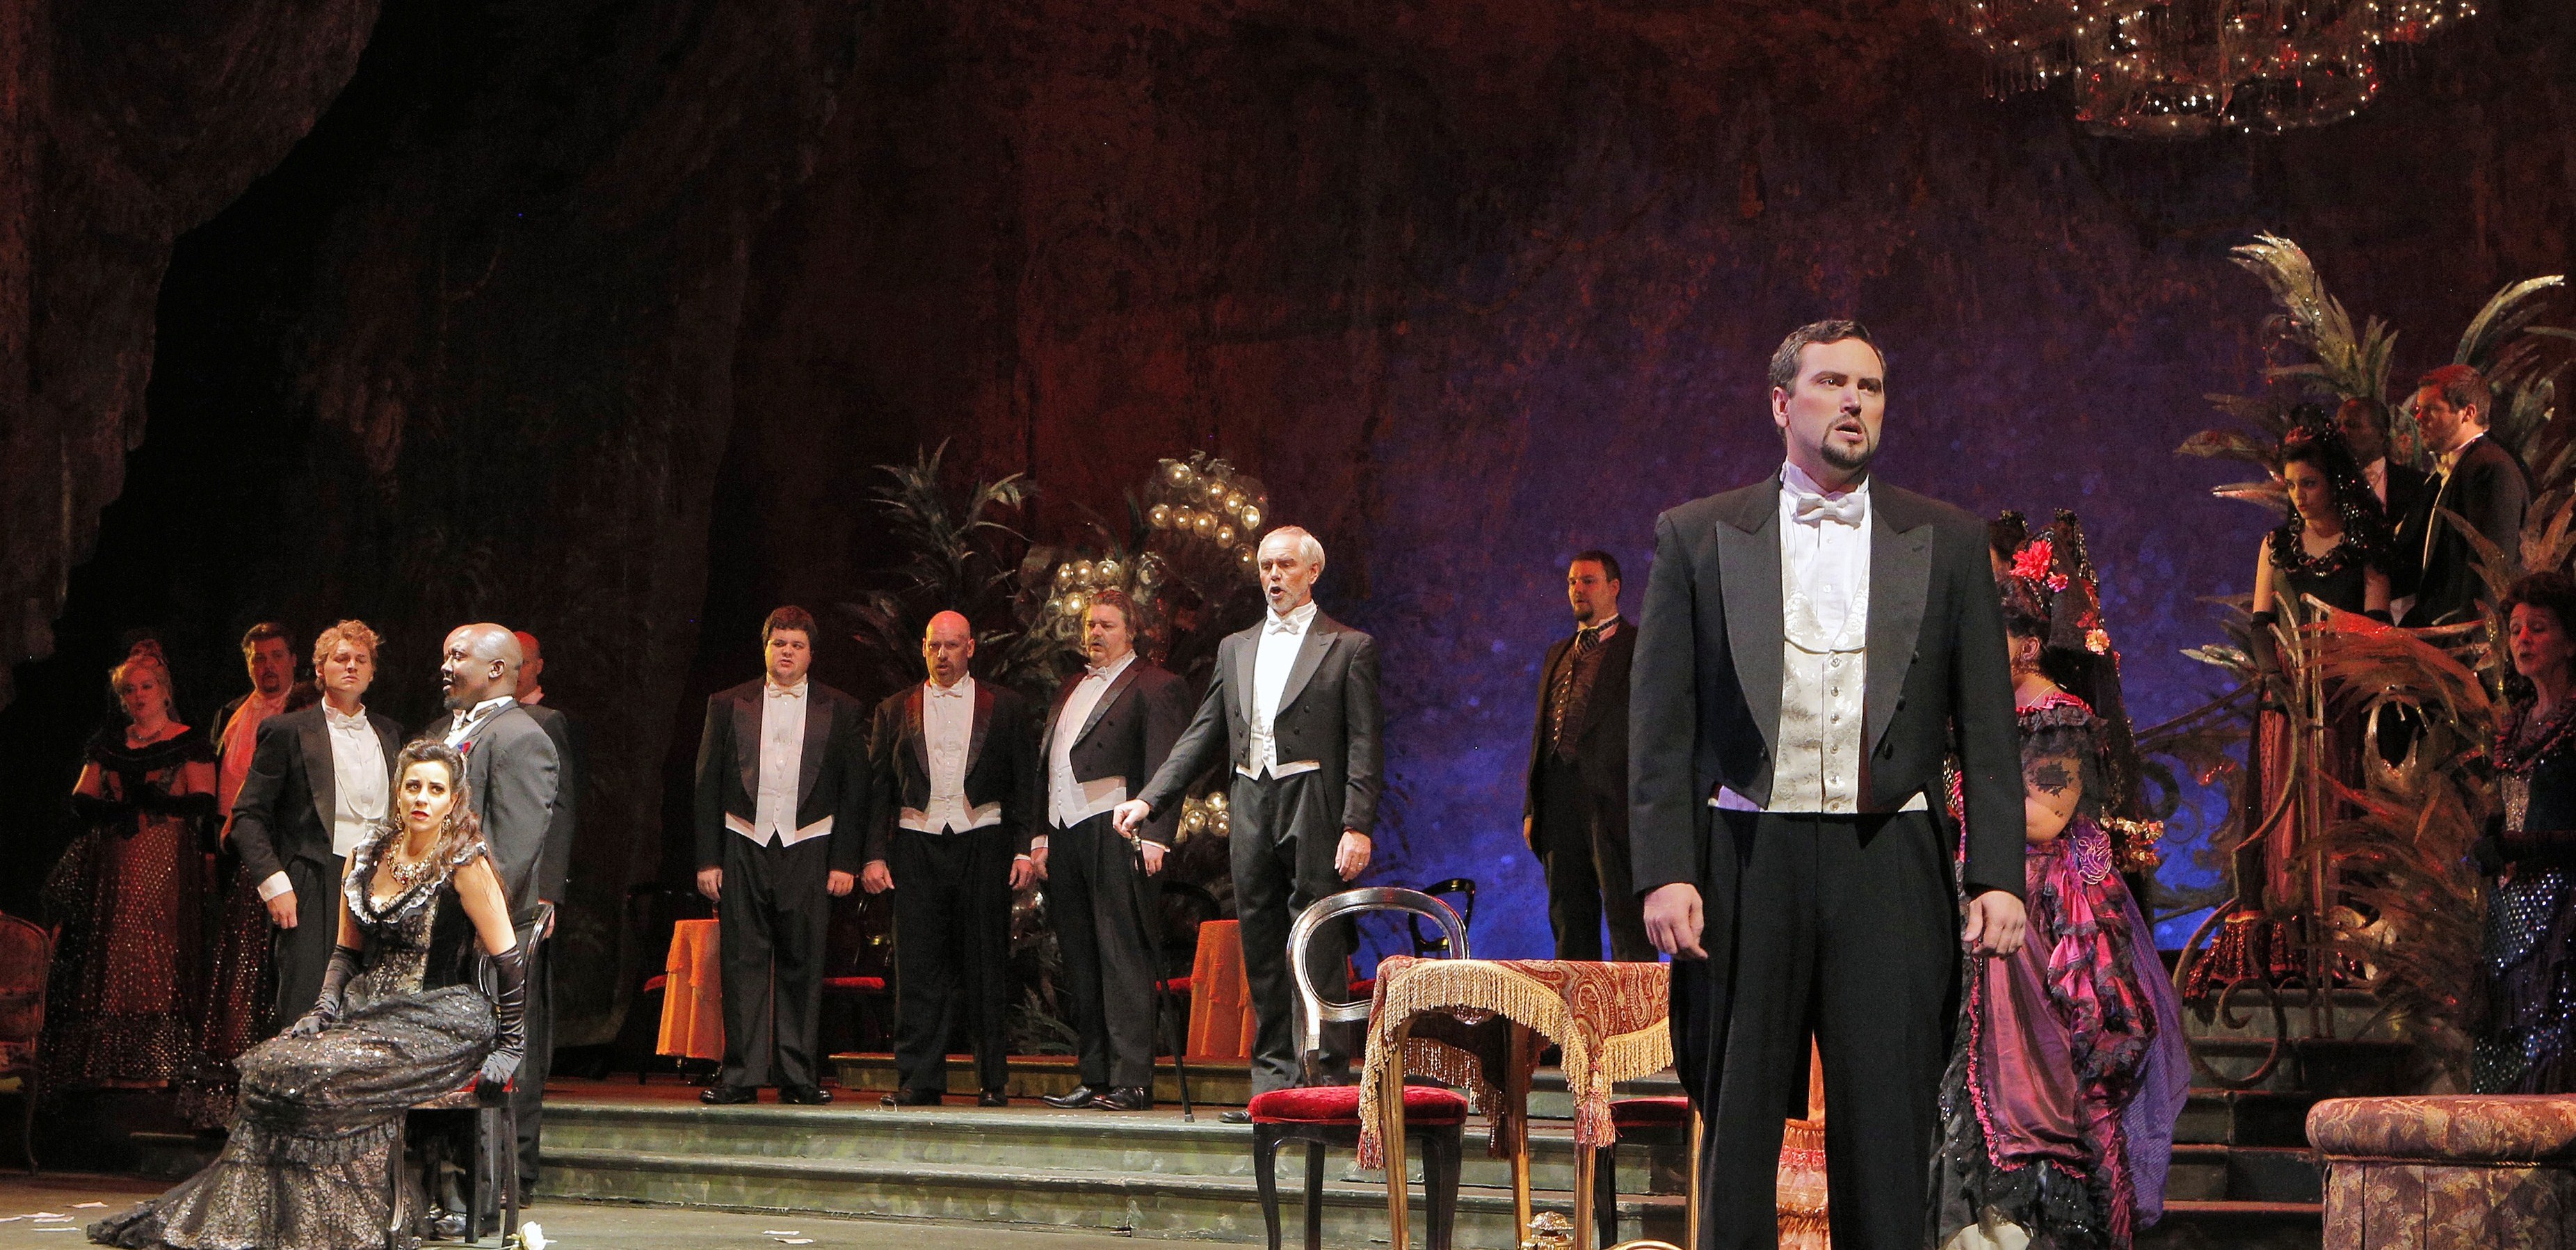 PASSION WITH A FLICKER OF FIRE: Lyric brings attractive production, fresh voices, to Verdi classic